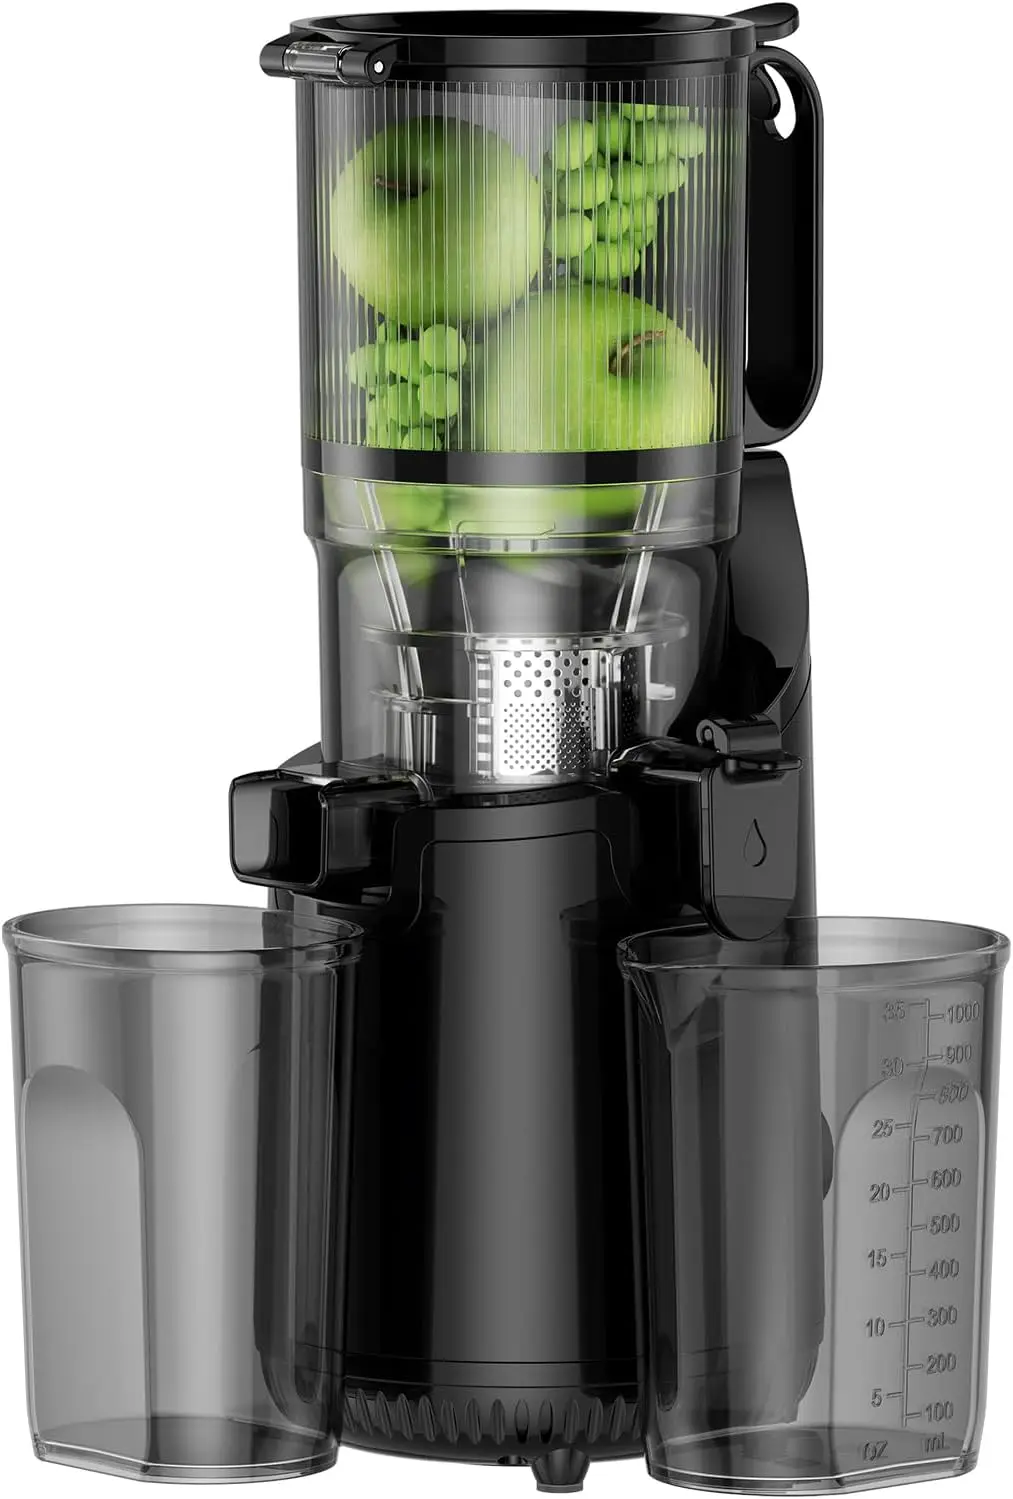 

Cold Press Juicer,Slow Masticating Machines with Extra Large Feed Chute Fit Whole Fruits &Vegetables Easy Clean,High Juice Yield